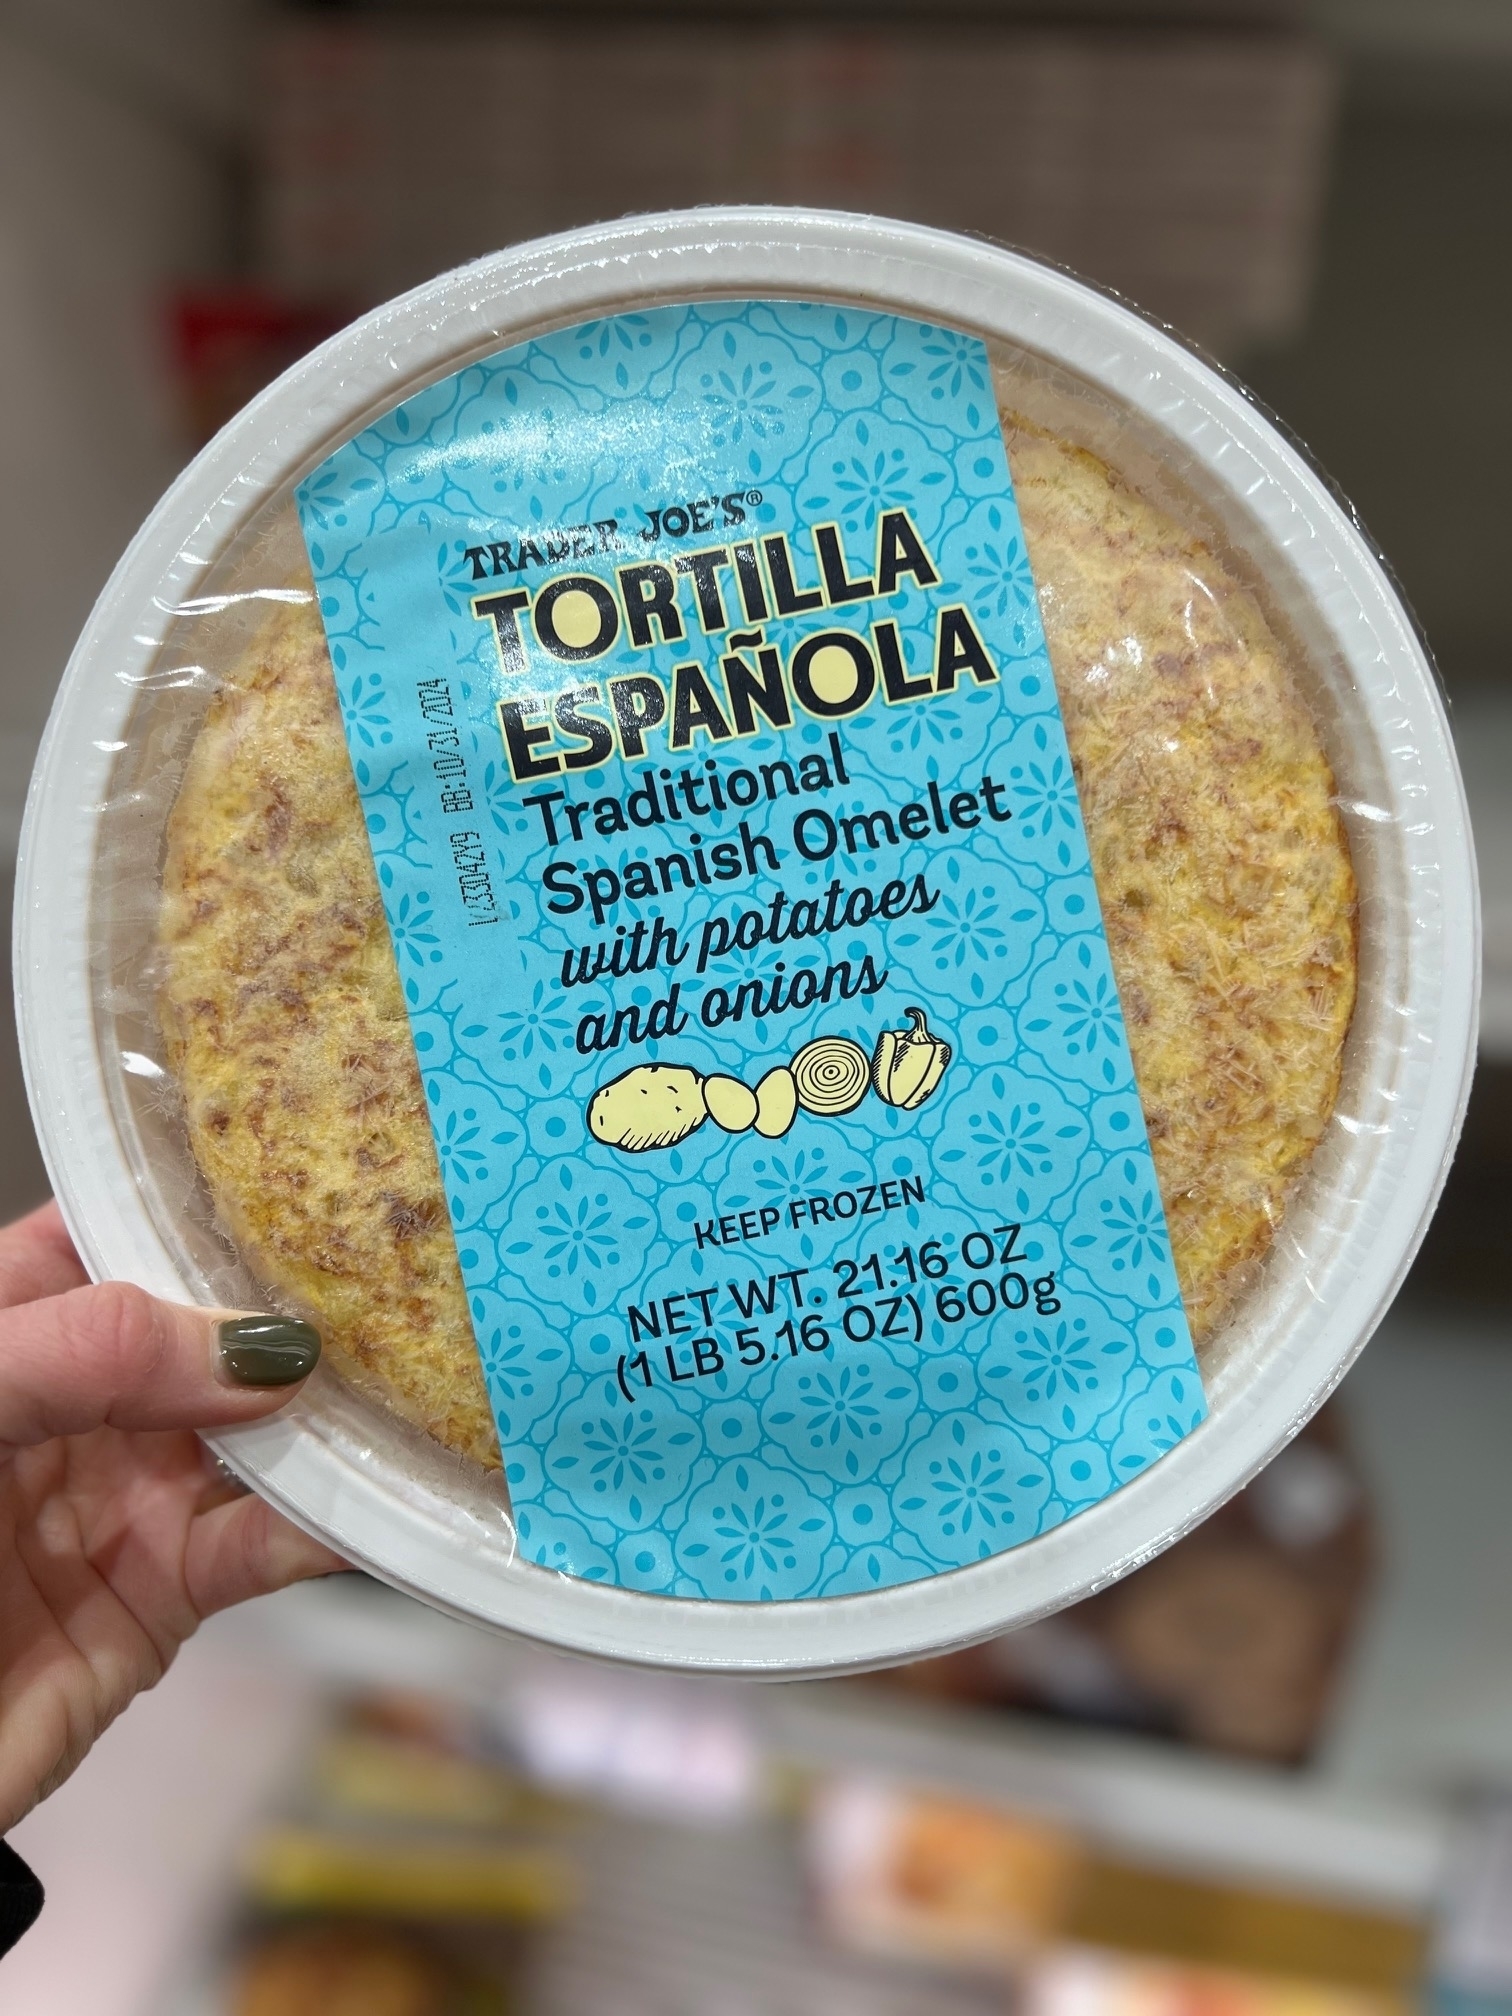 Hand holding a Trader Joe&#x27;s Tortilla Española Traditional Spanish Omelet packaging in a store